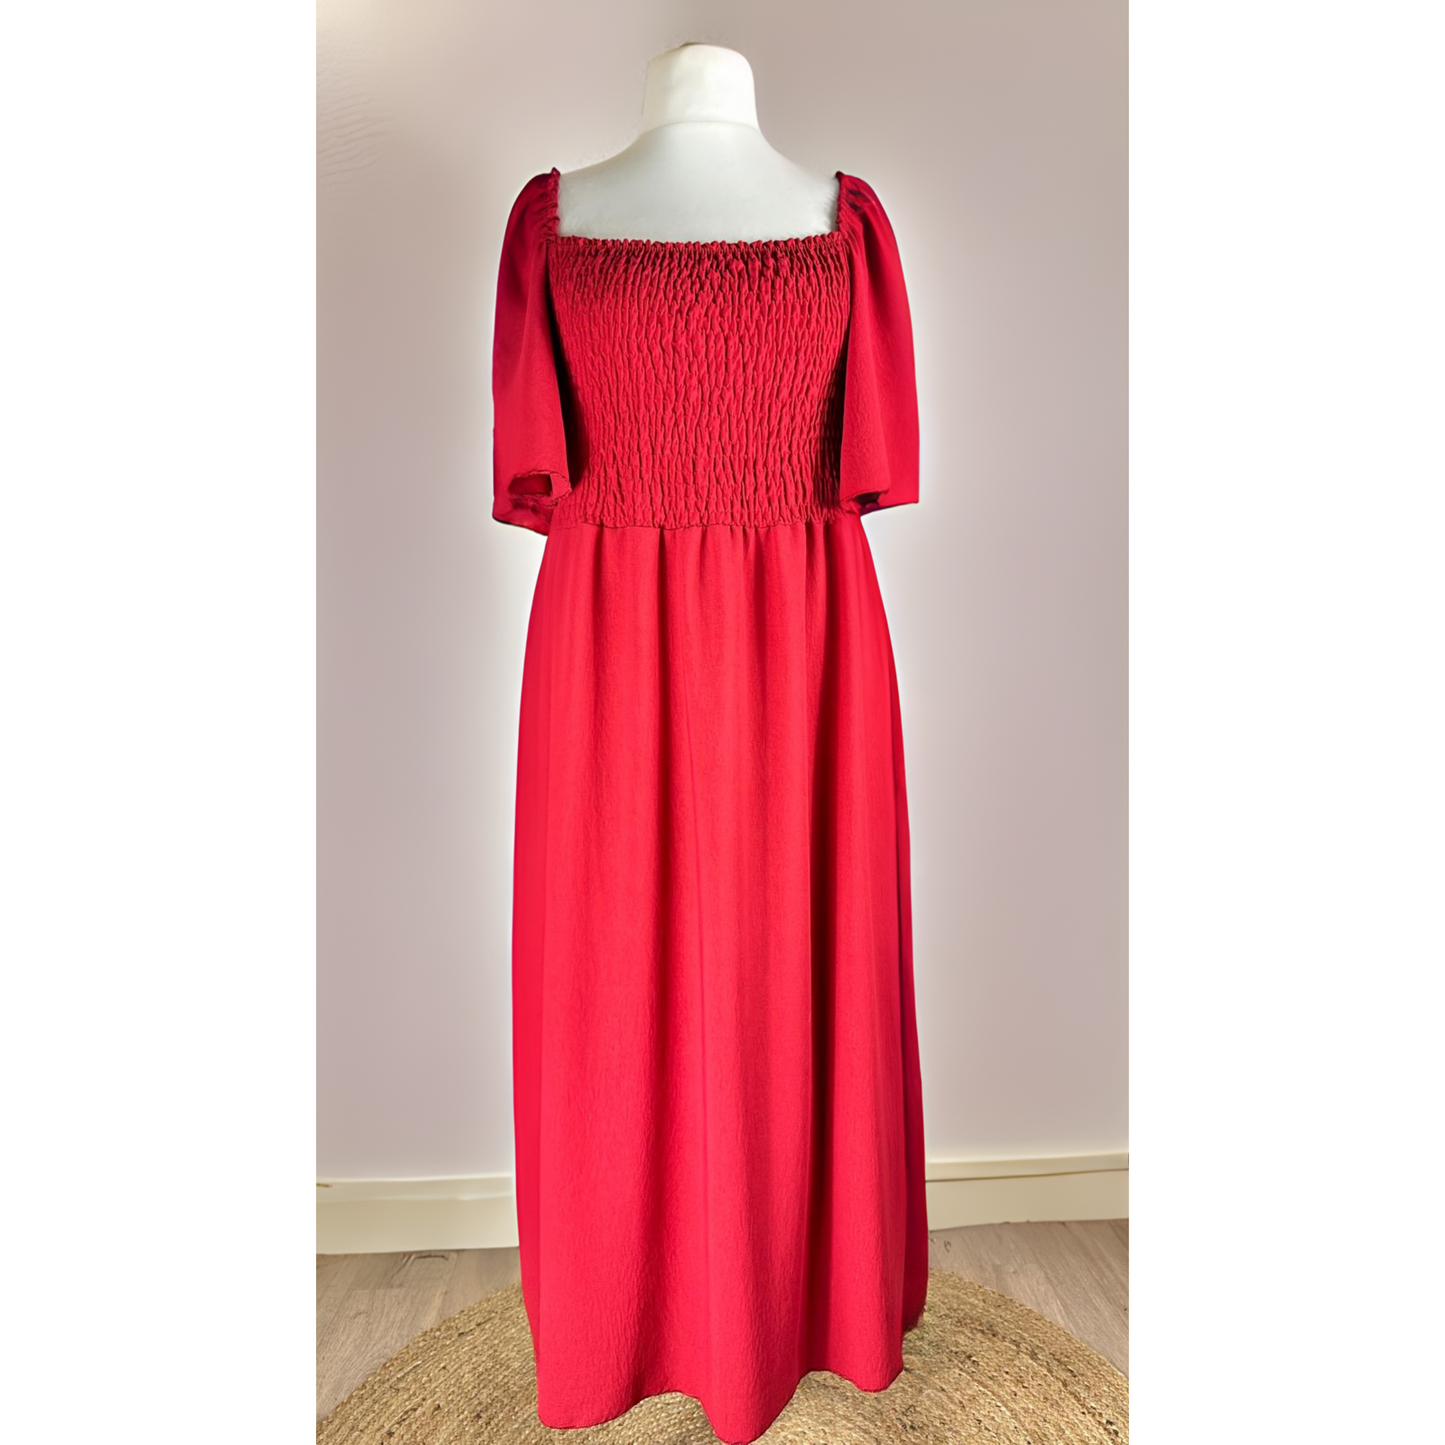 ROBE LONGUE BUSTE SMOCK - ROUGE PASSION